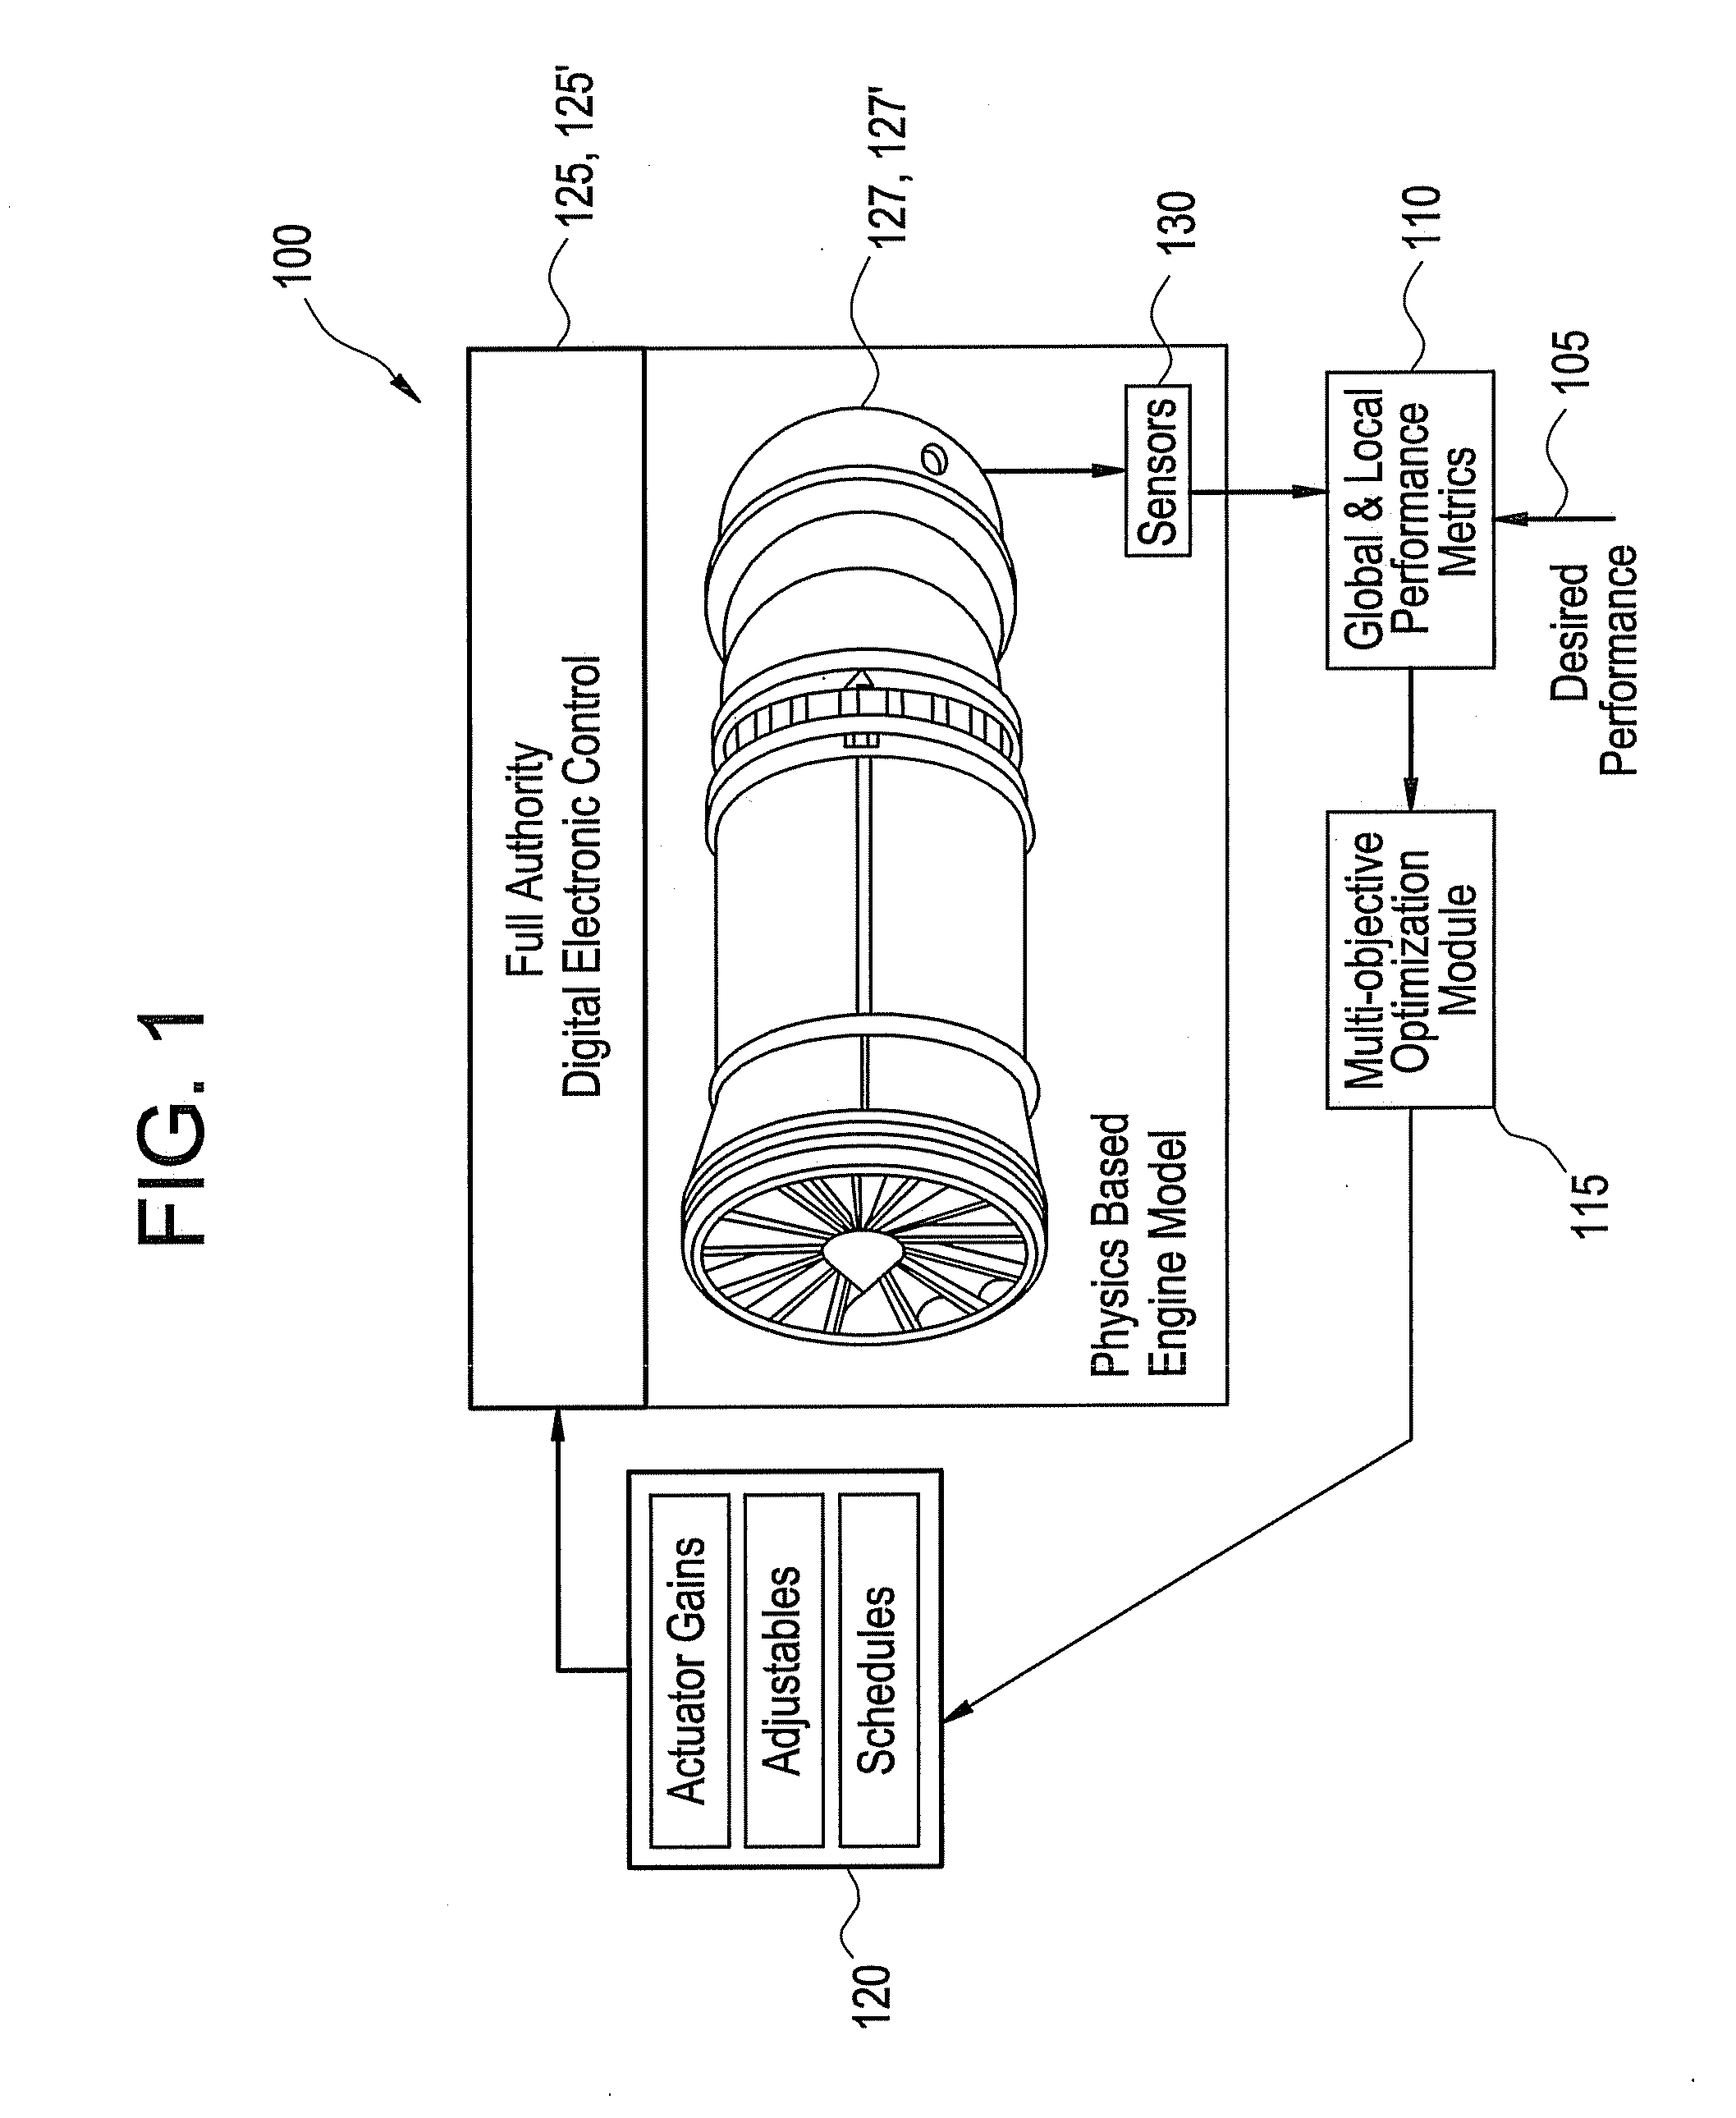 Method and system for accommodating deterioration characteristics of machines